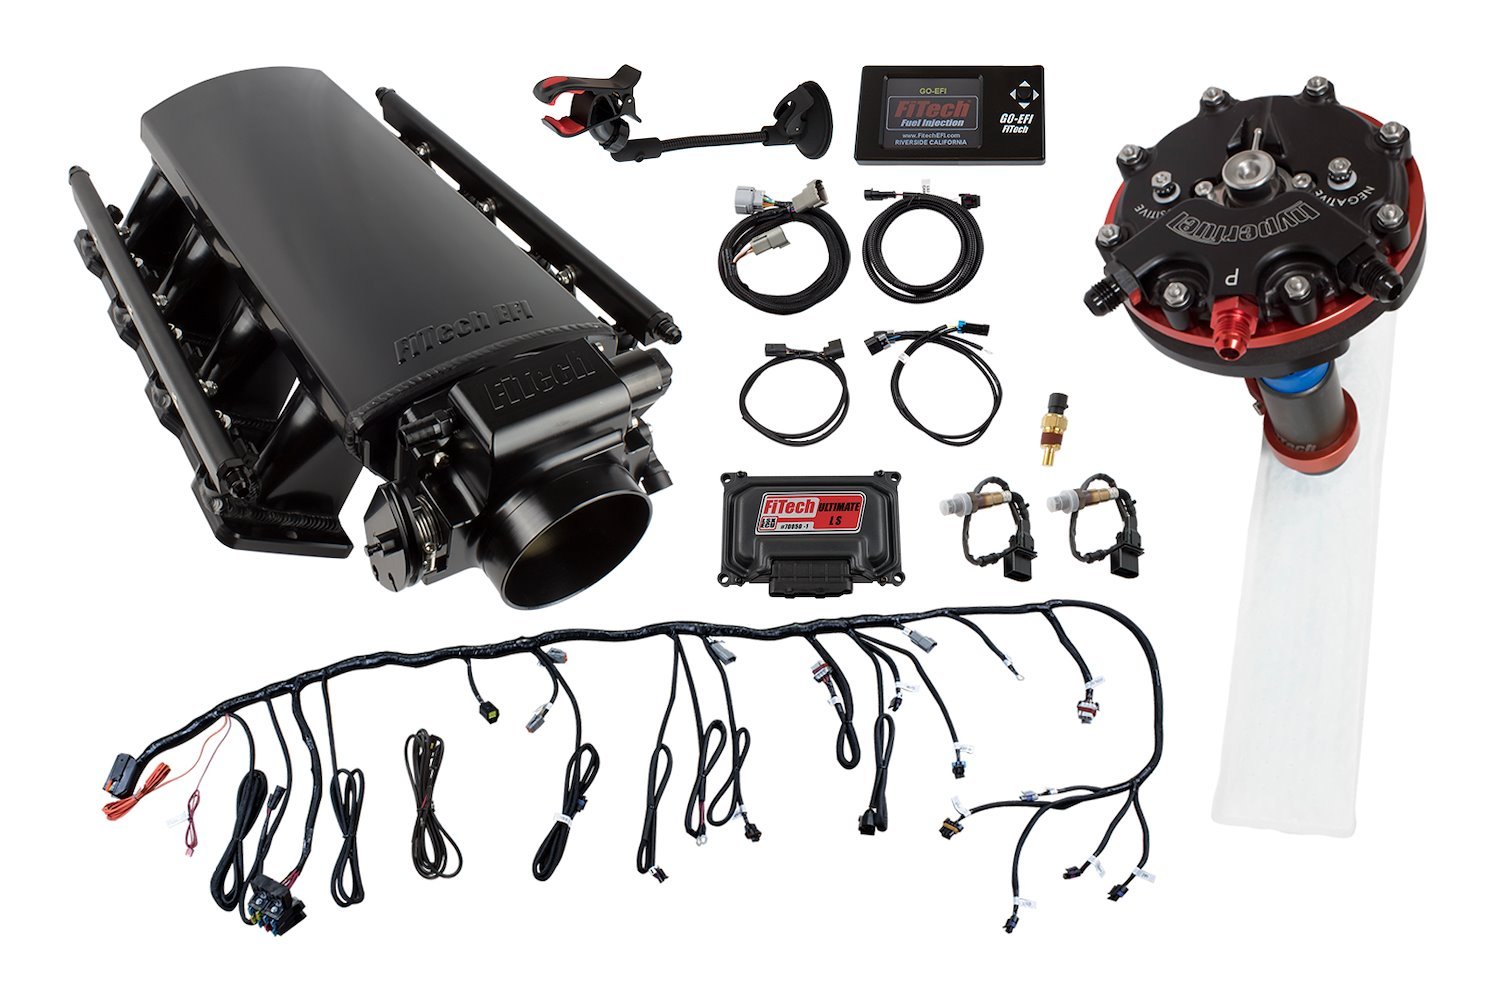 Ultimate LS EFI Induction System LS1/LS2/LS6 750 HP with Hy-Fuel Single Pump Regulated In-Tank Retrofit Kit